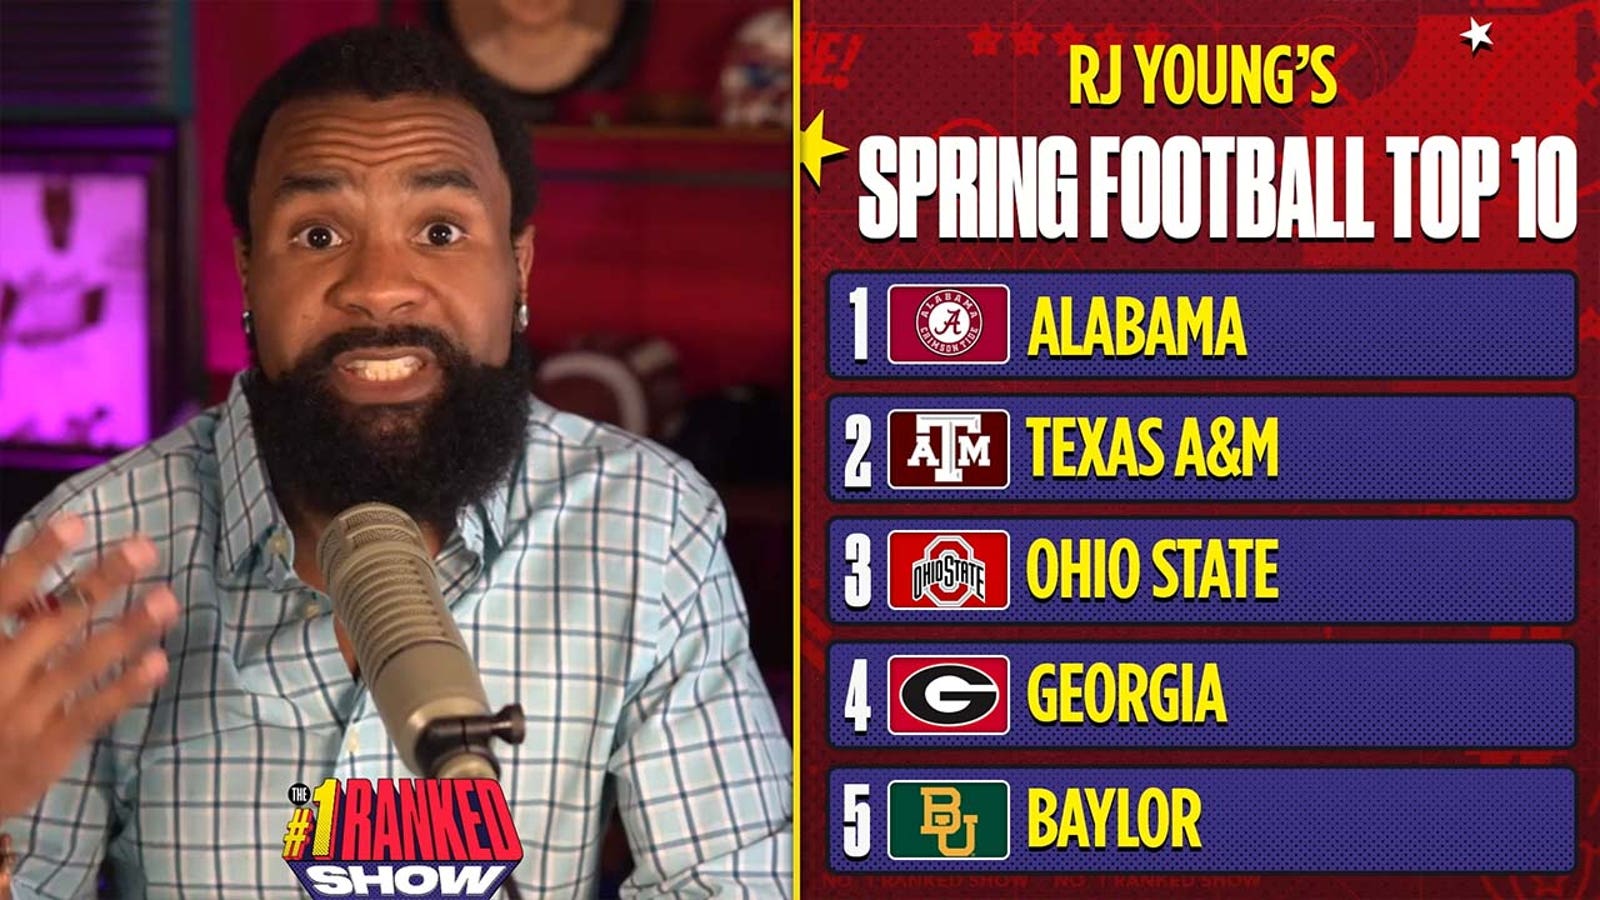 Alabama, Texas A&M and Ohio State crack RJ Young's spring top five